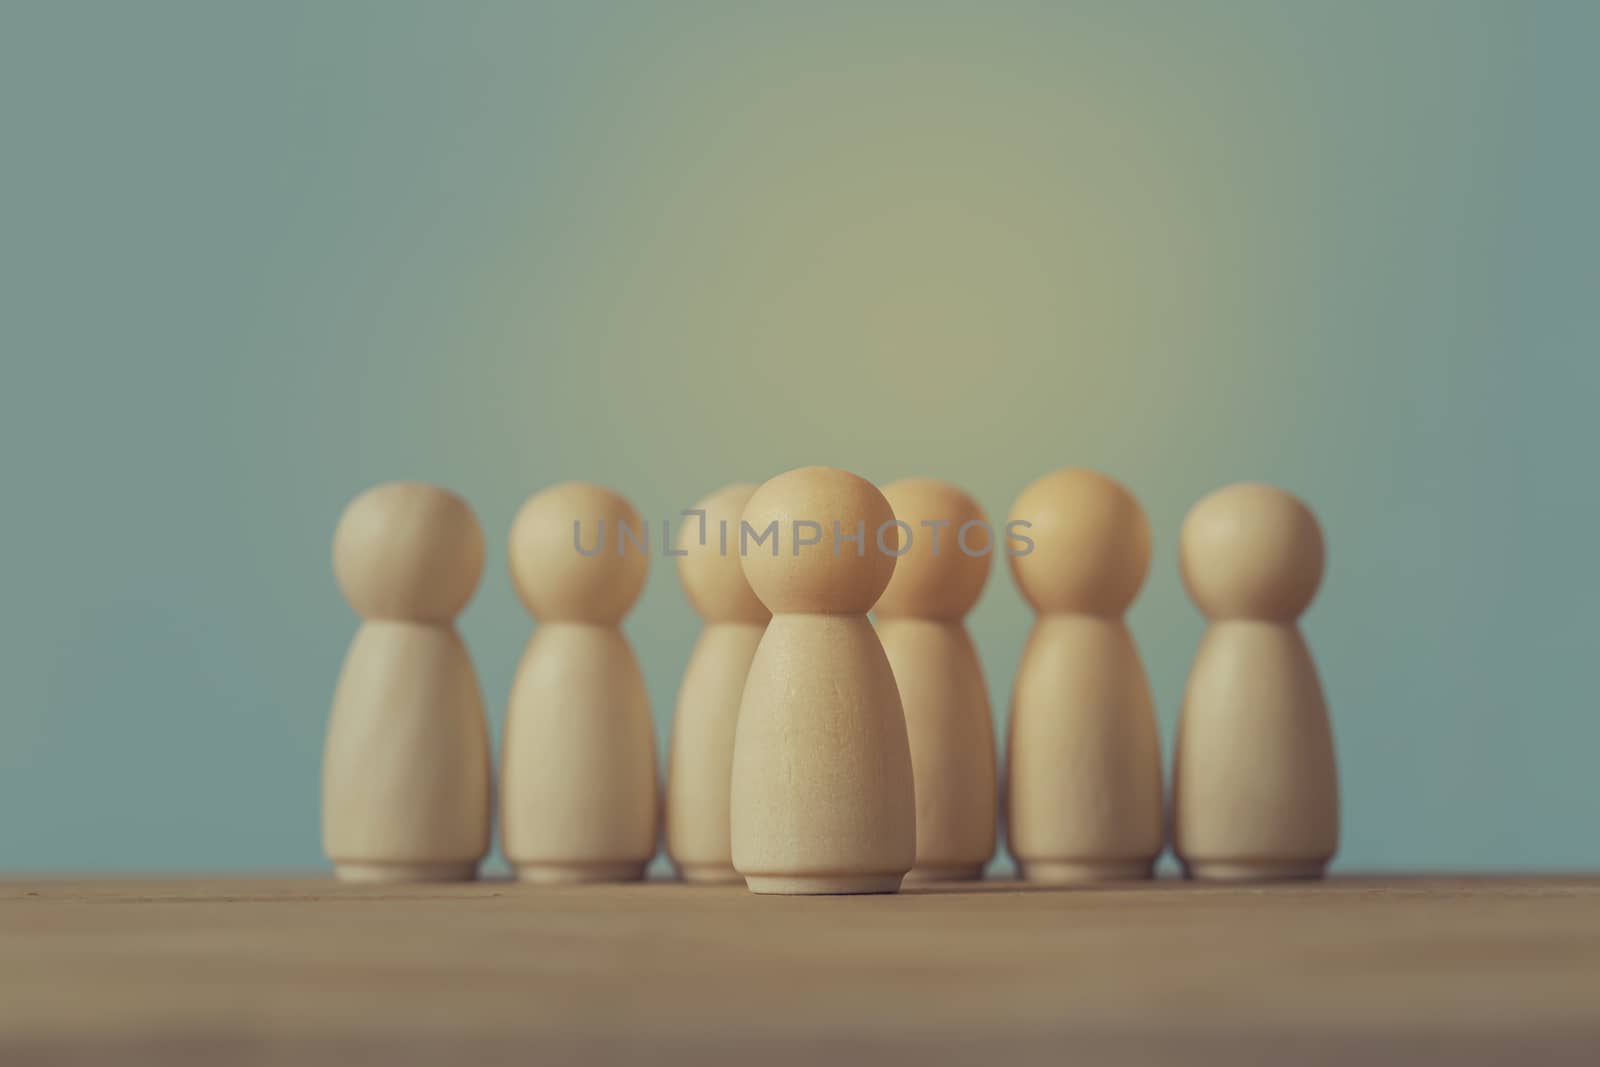 Successful business team leader concept: Wooden figures of man and people standing out from the crowd. depicts ability of individual to influence and lead followers or other members of organization.